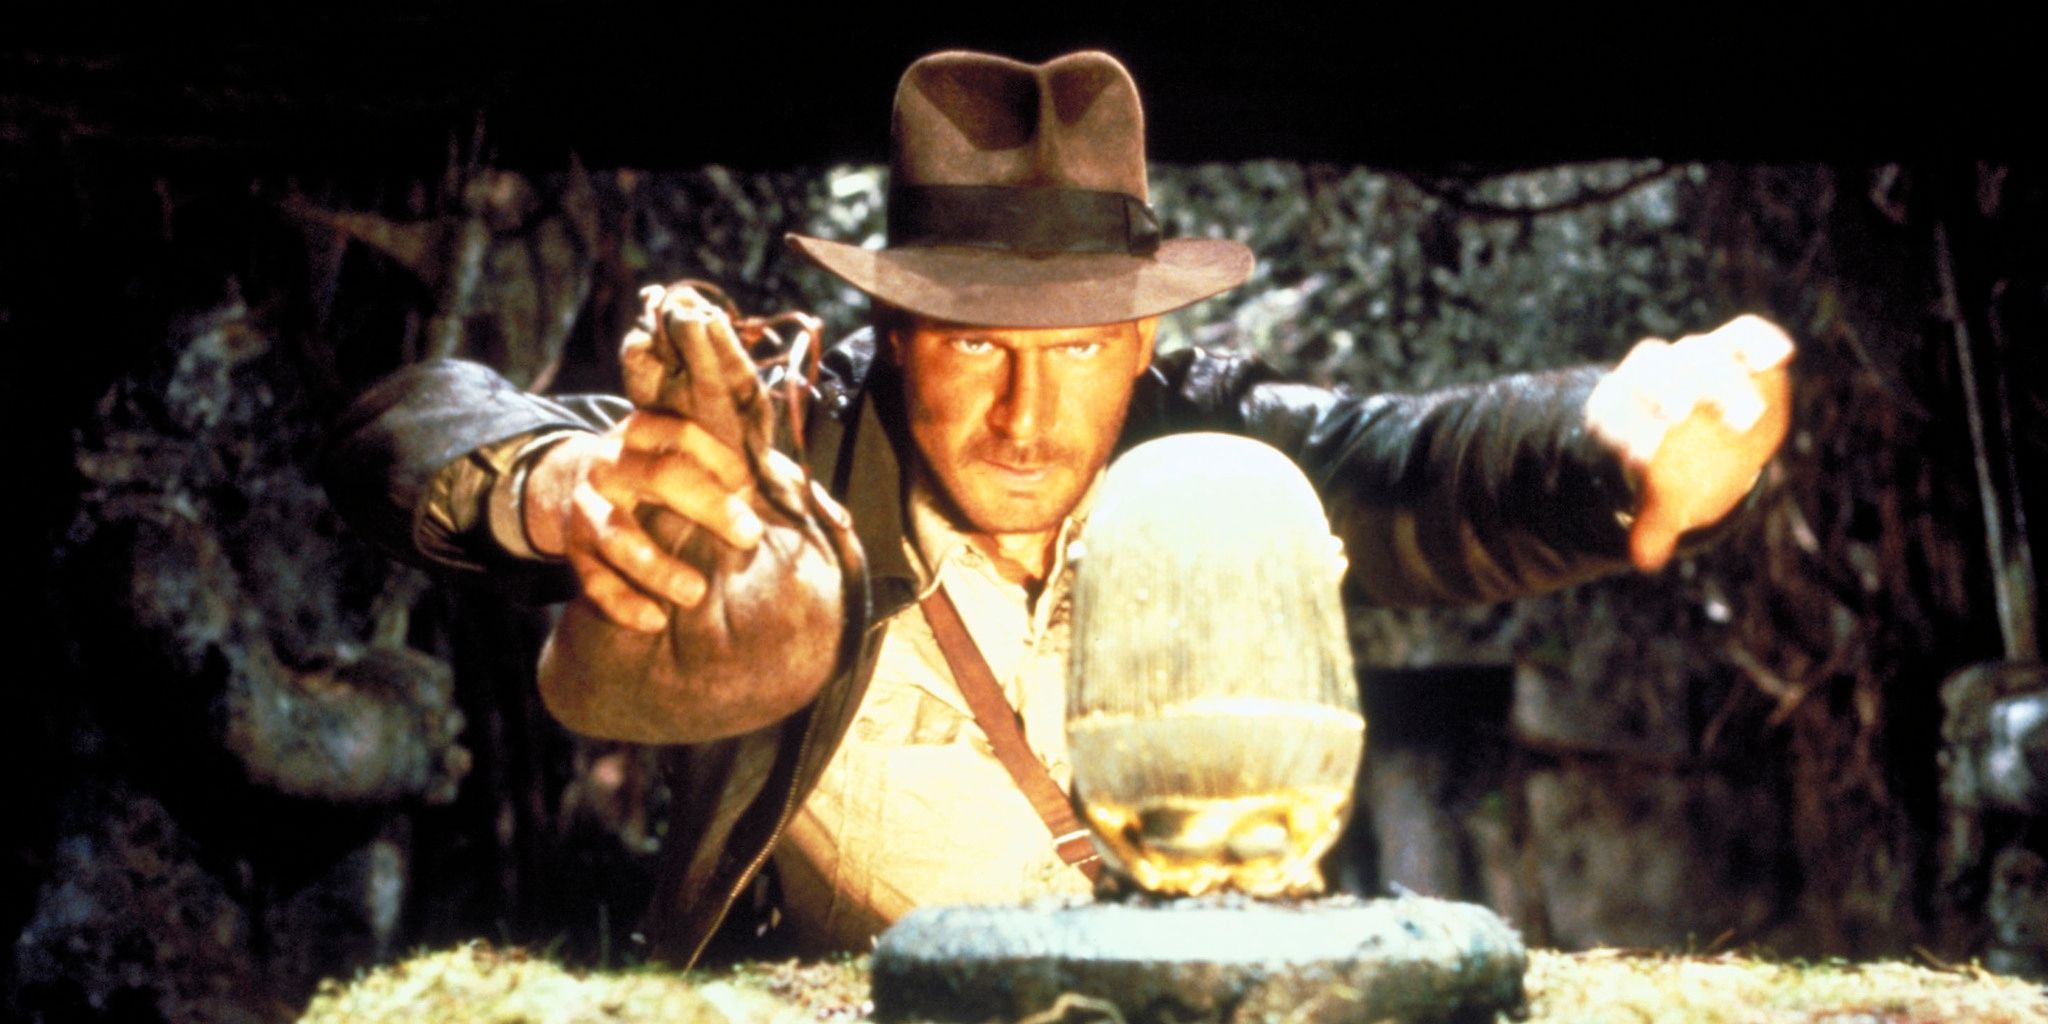 Indy steals treasure from a tomb in Raiders of the Lost Ark